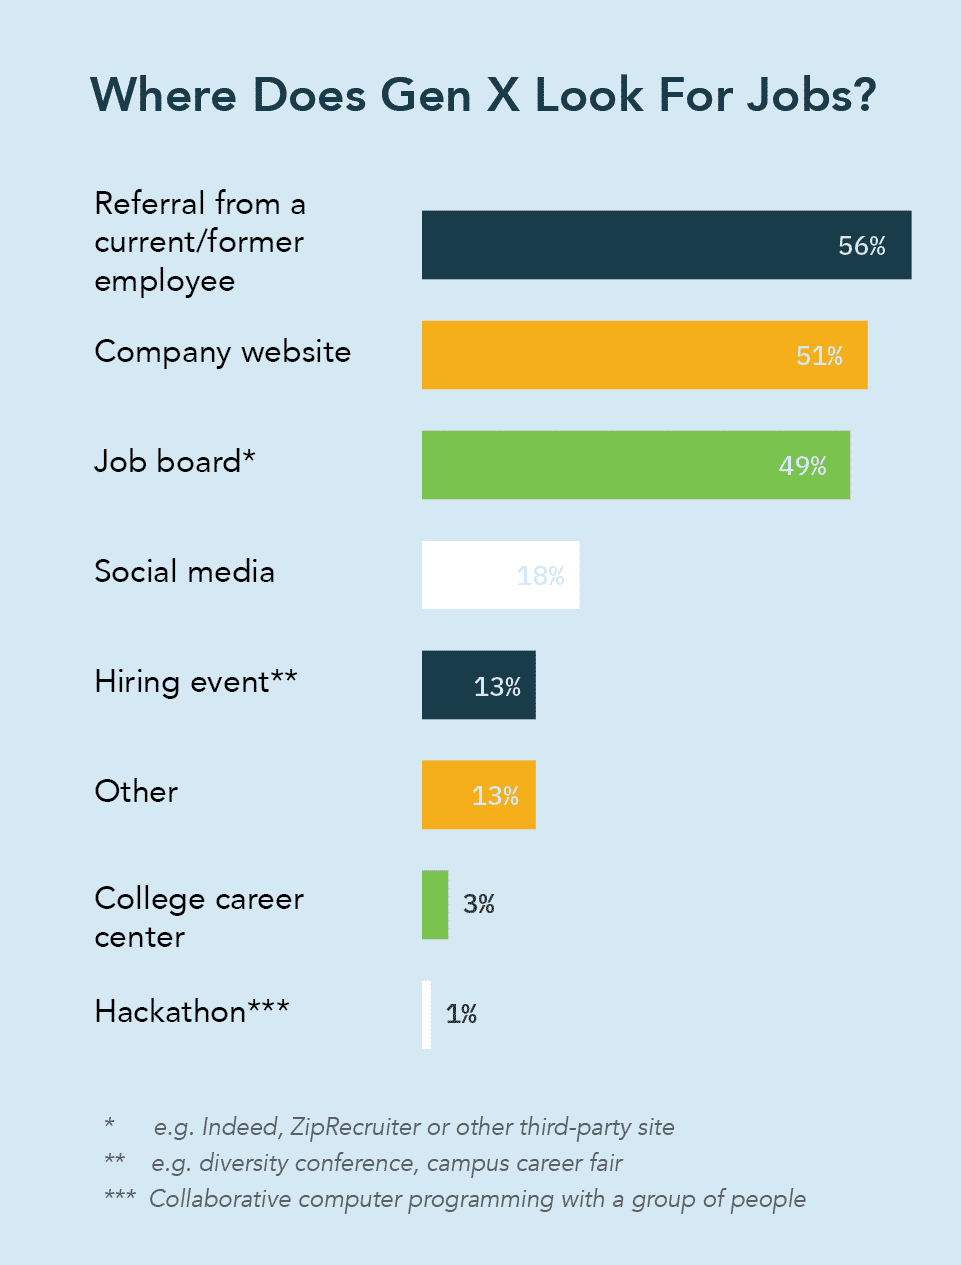 Graph showing where Gen X looks for jobs, starting at referrals from current/former employees and ending with a Hackathon.